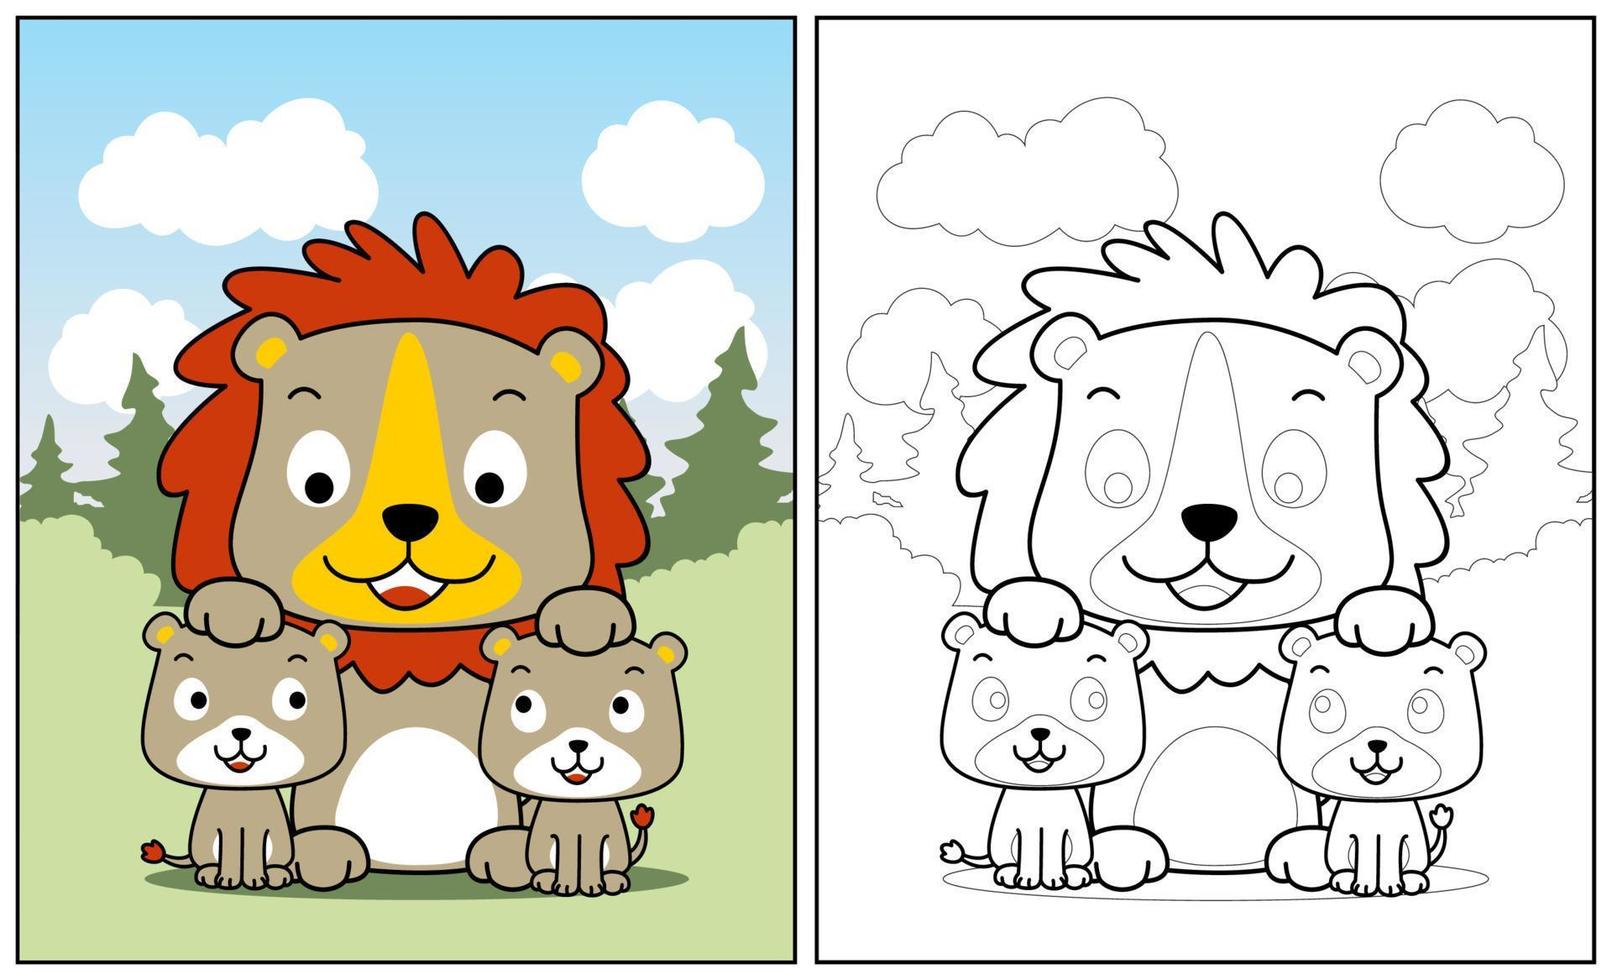 Cute lion family, vector cartoon illustration, coloring page or book